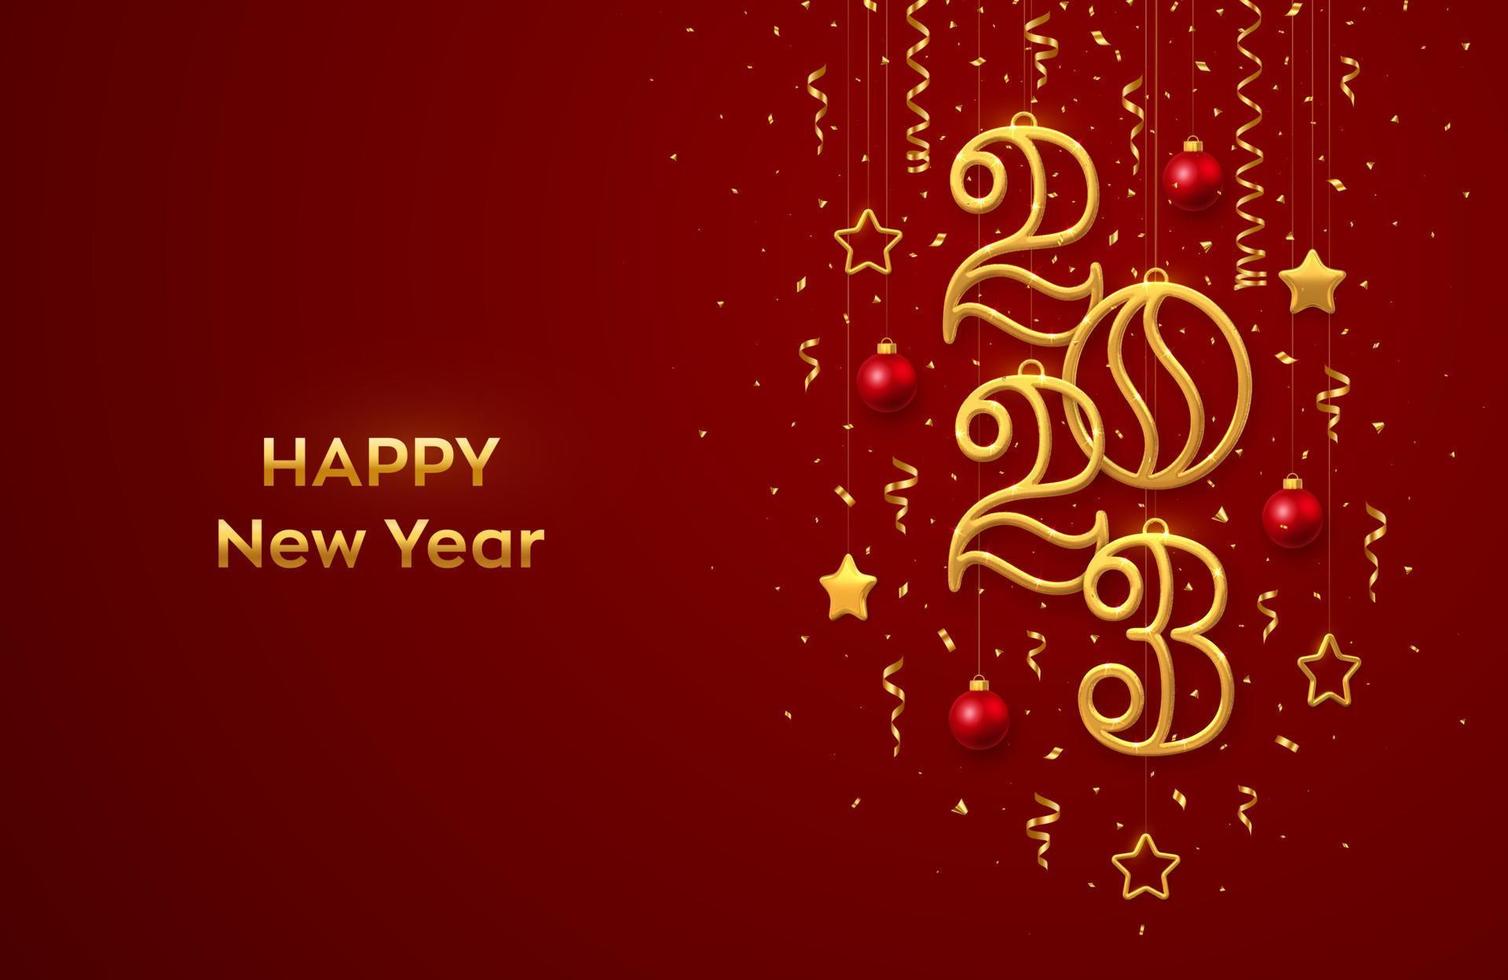 Happy New 2023 Year. Hanging Golden metallic numbers 2023 with shining 3D metallic stars, balls and confetti on red background. New Year greeting card, banner template. Realistic Vector illustration.